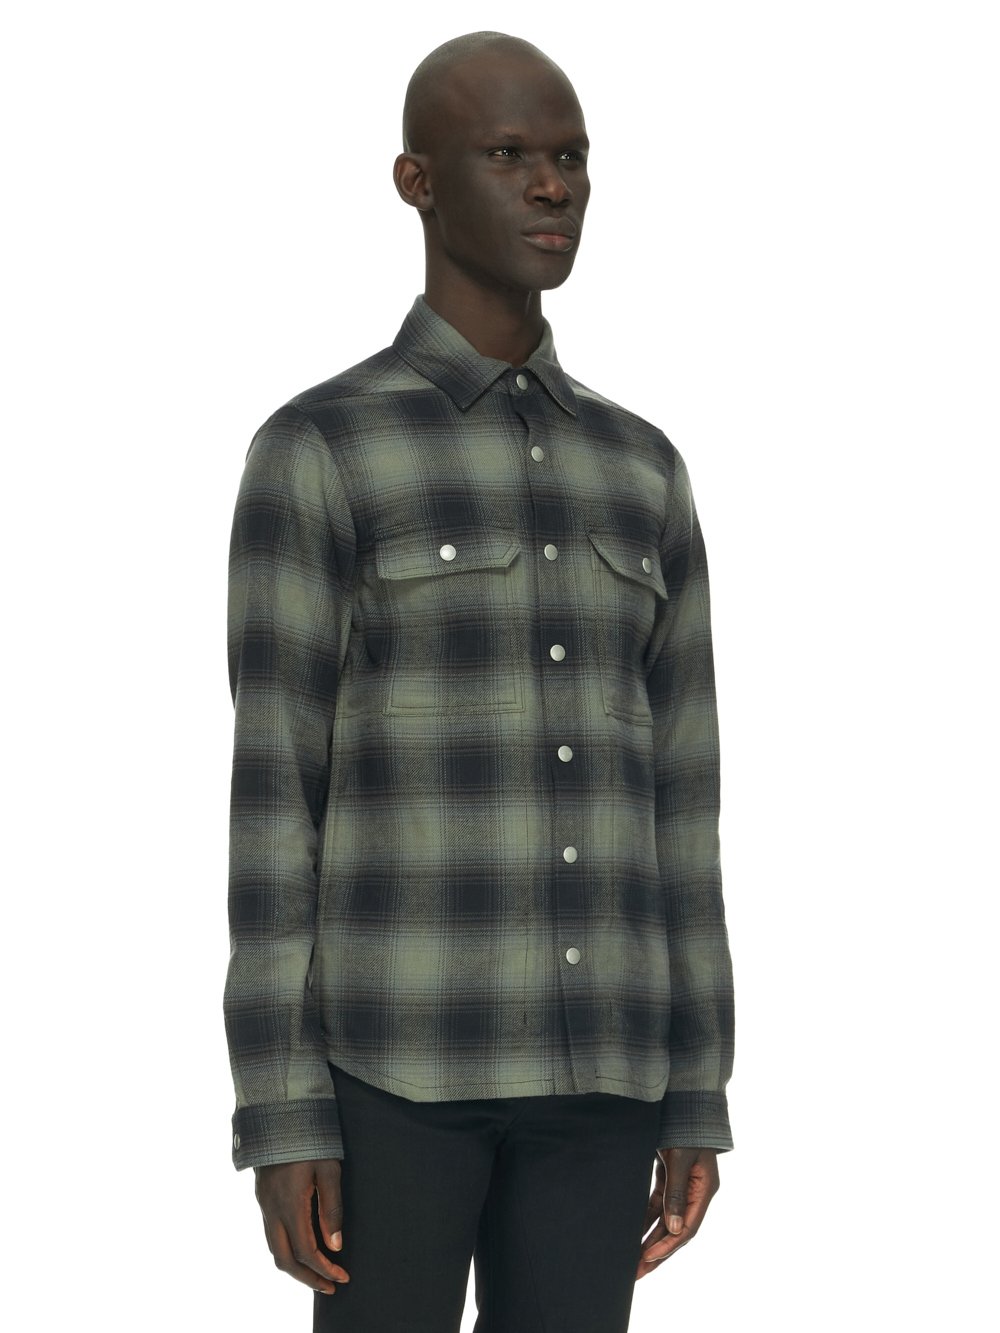 DRKSHDW FW23 LUXOR OUTERSHIRT IN BLACK OMBRE HEAVY COTTON PLAID